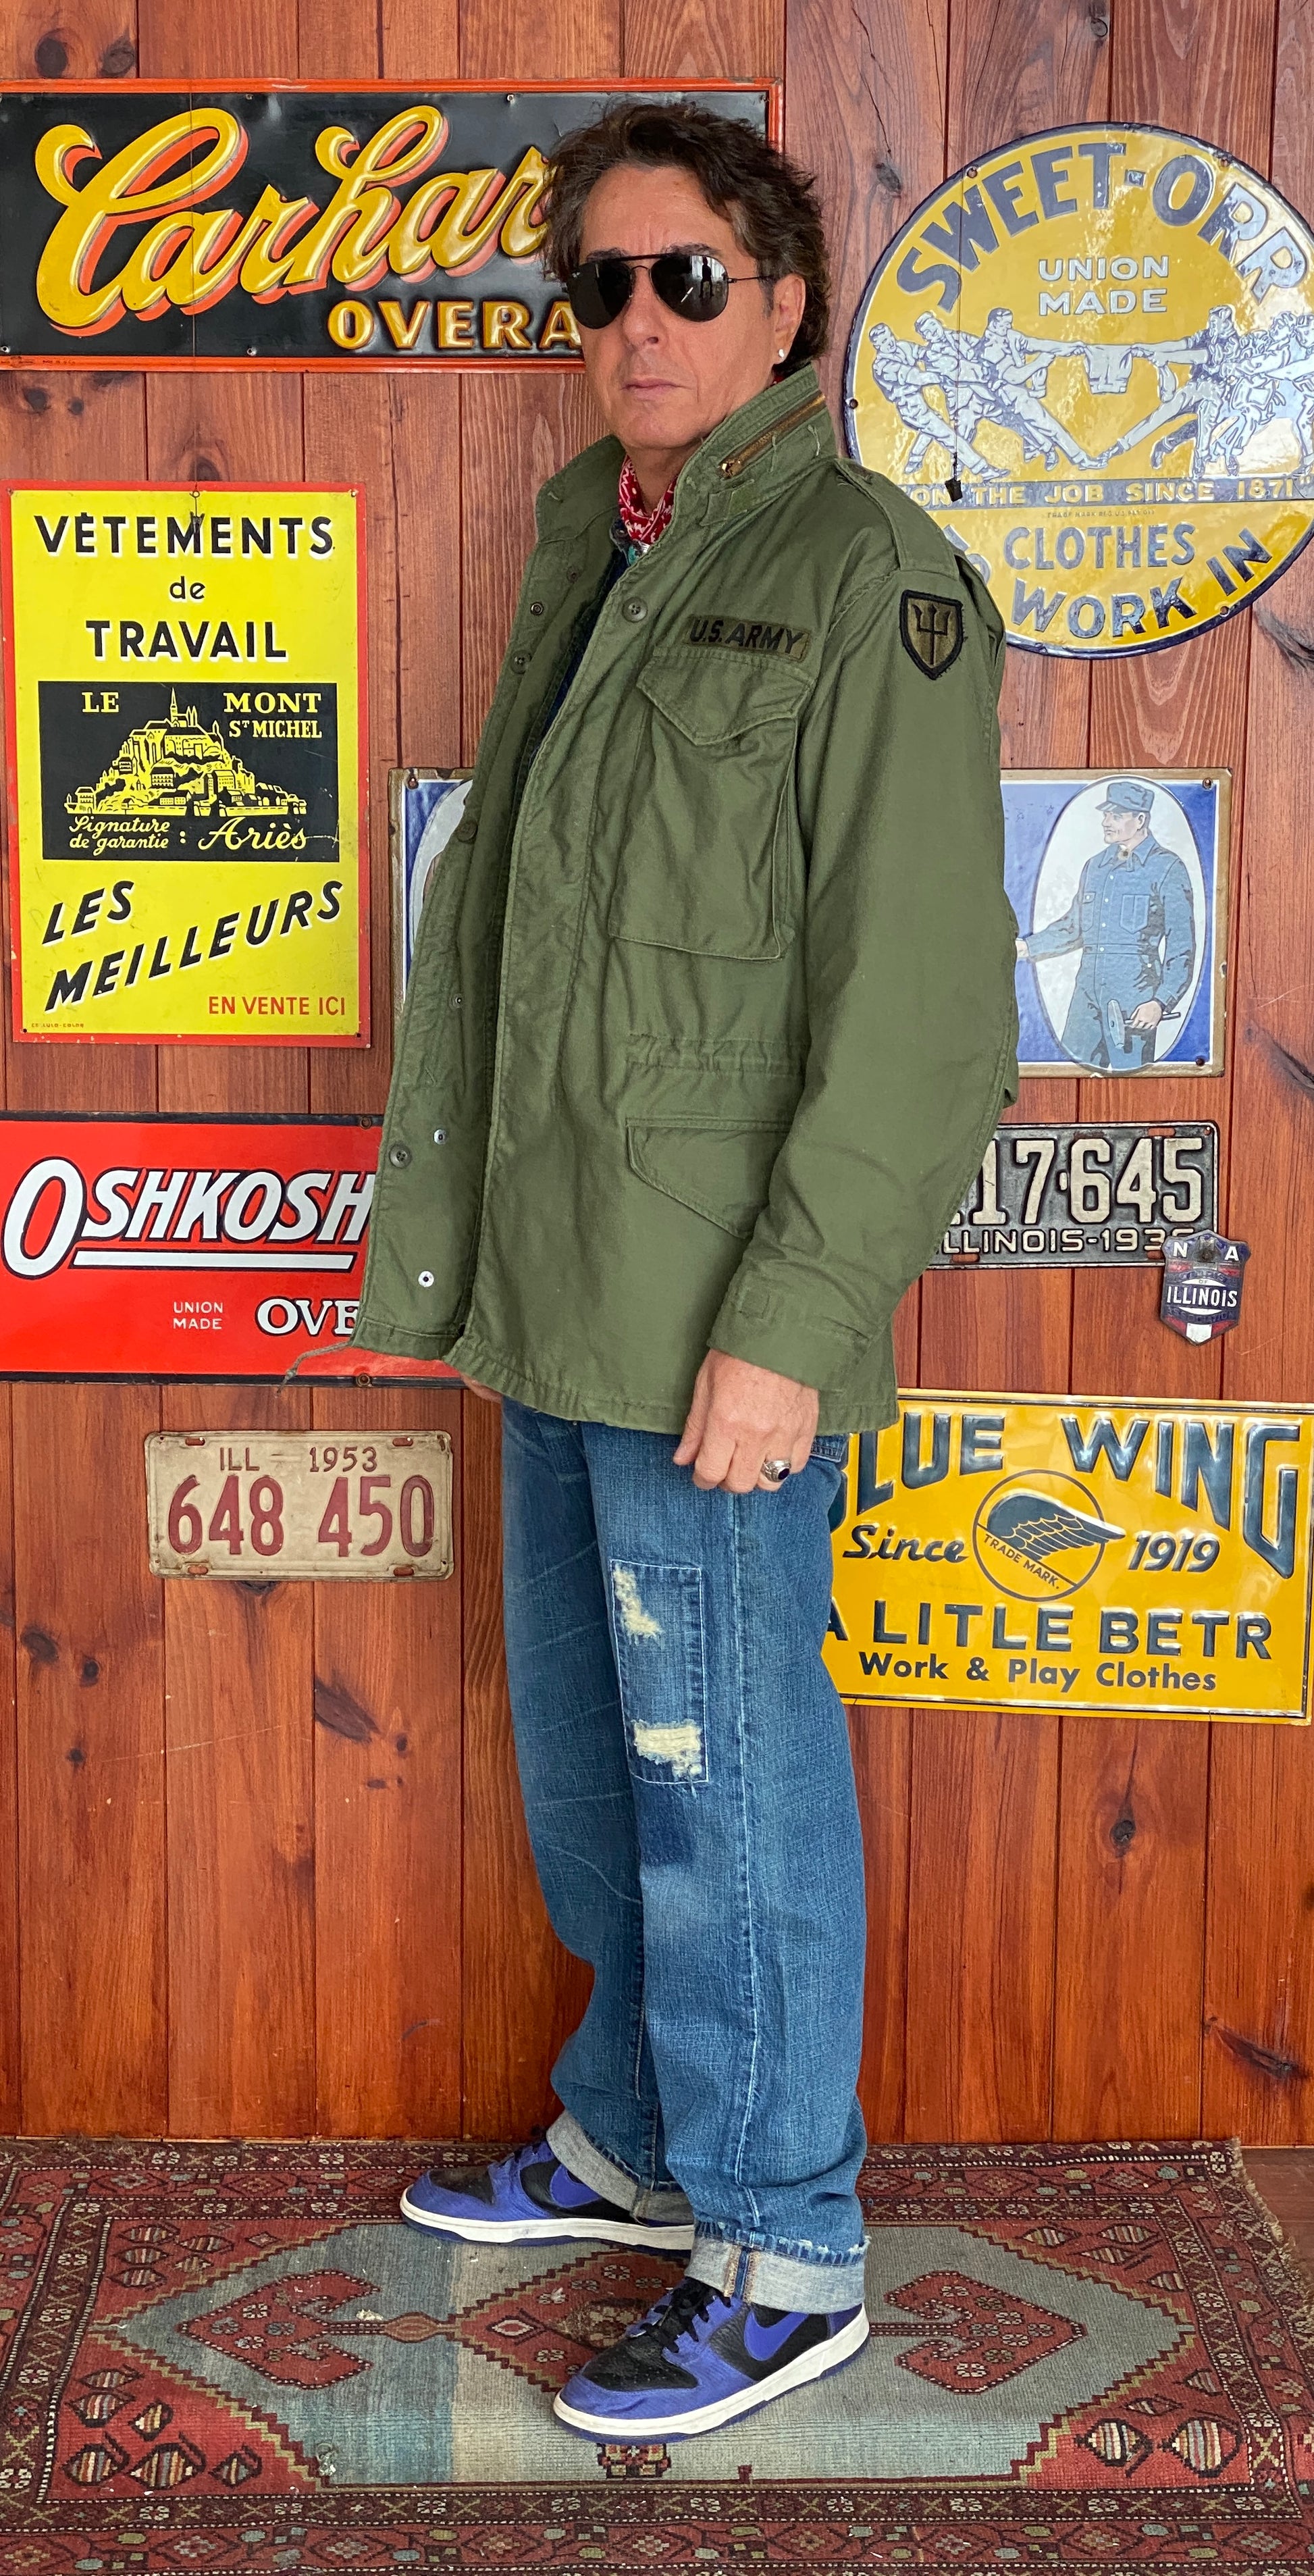 Authentic 1978 US Army Vintage M-65 Field Jacket in Olive Green | Classic Military Apparel with Timeless Style and Durability